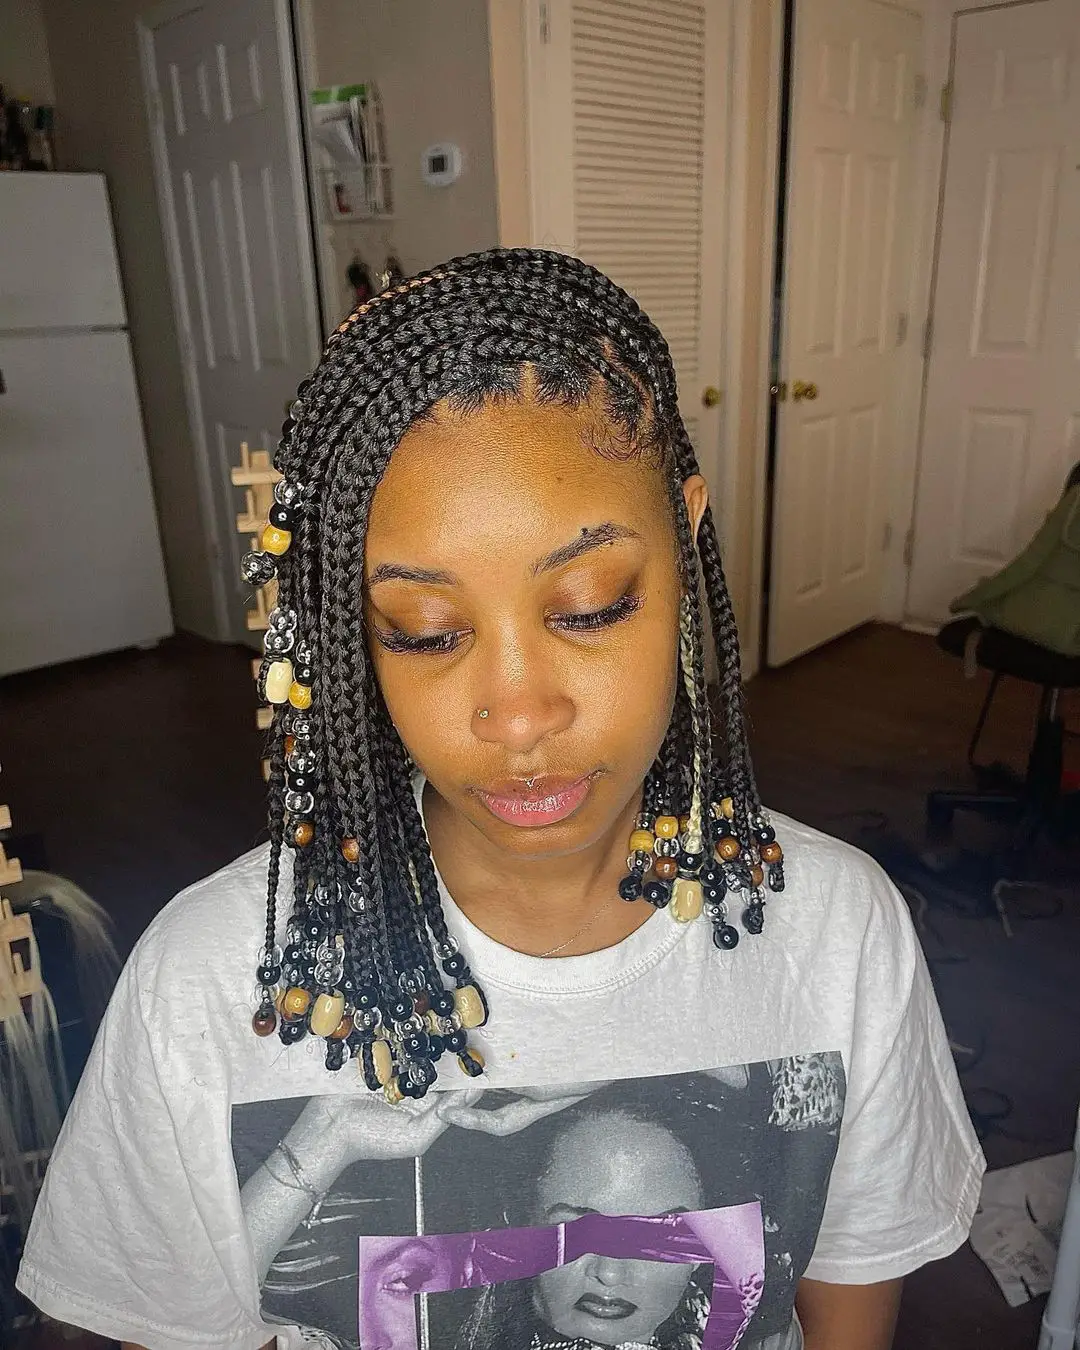 65 Knotless Braid Styles in 2022 You MUST See